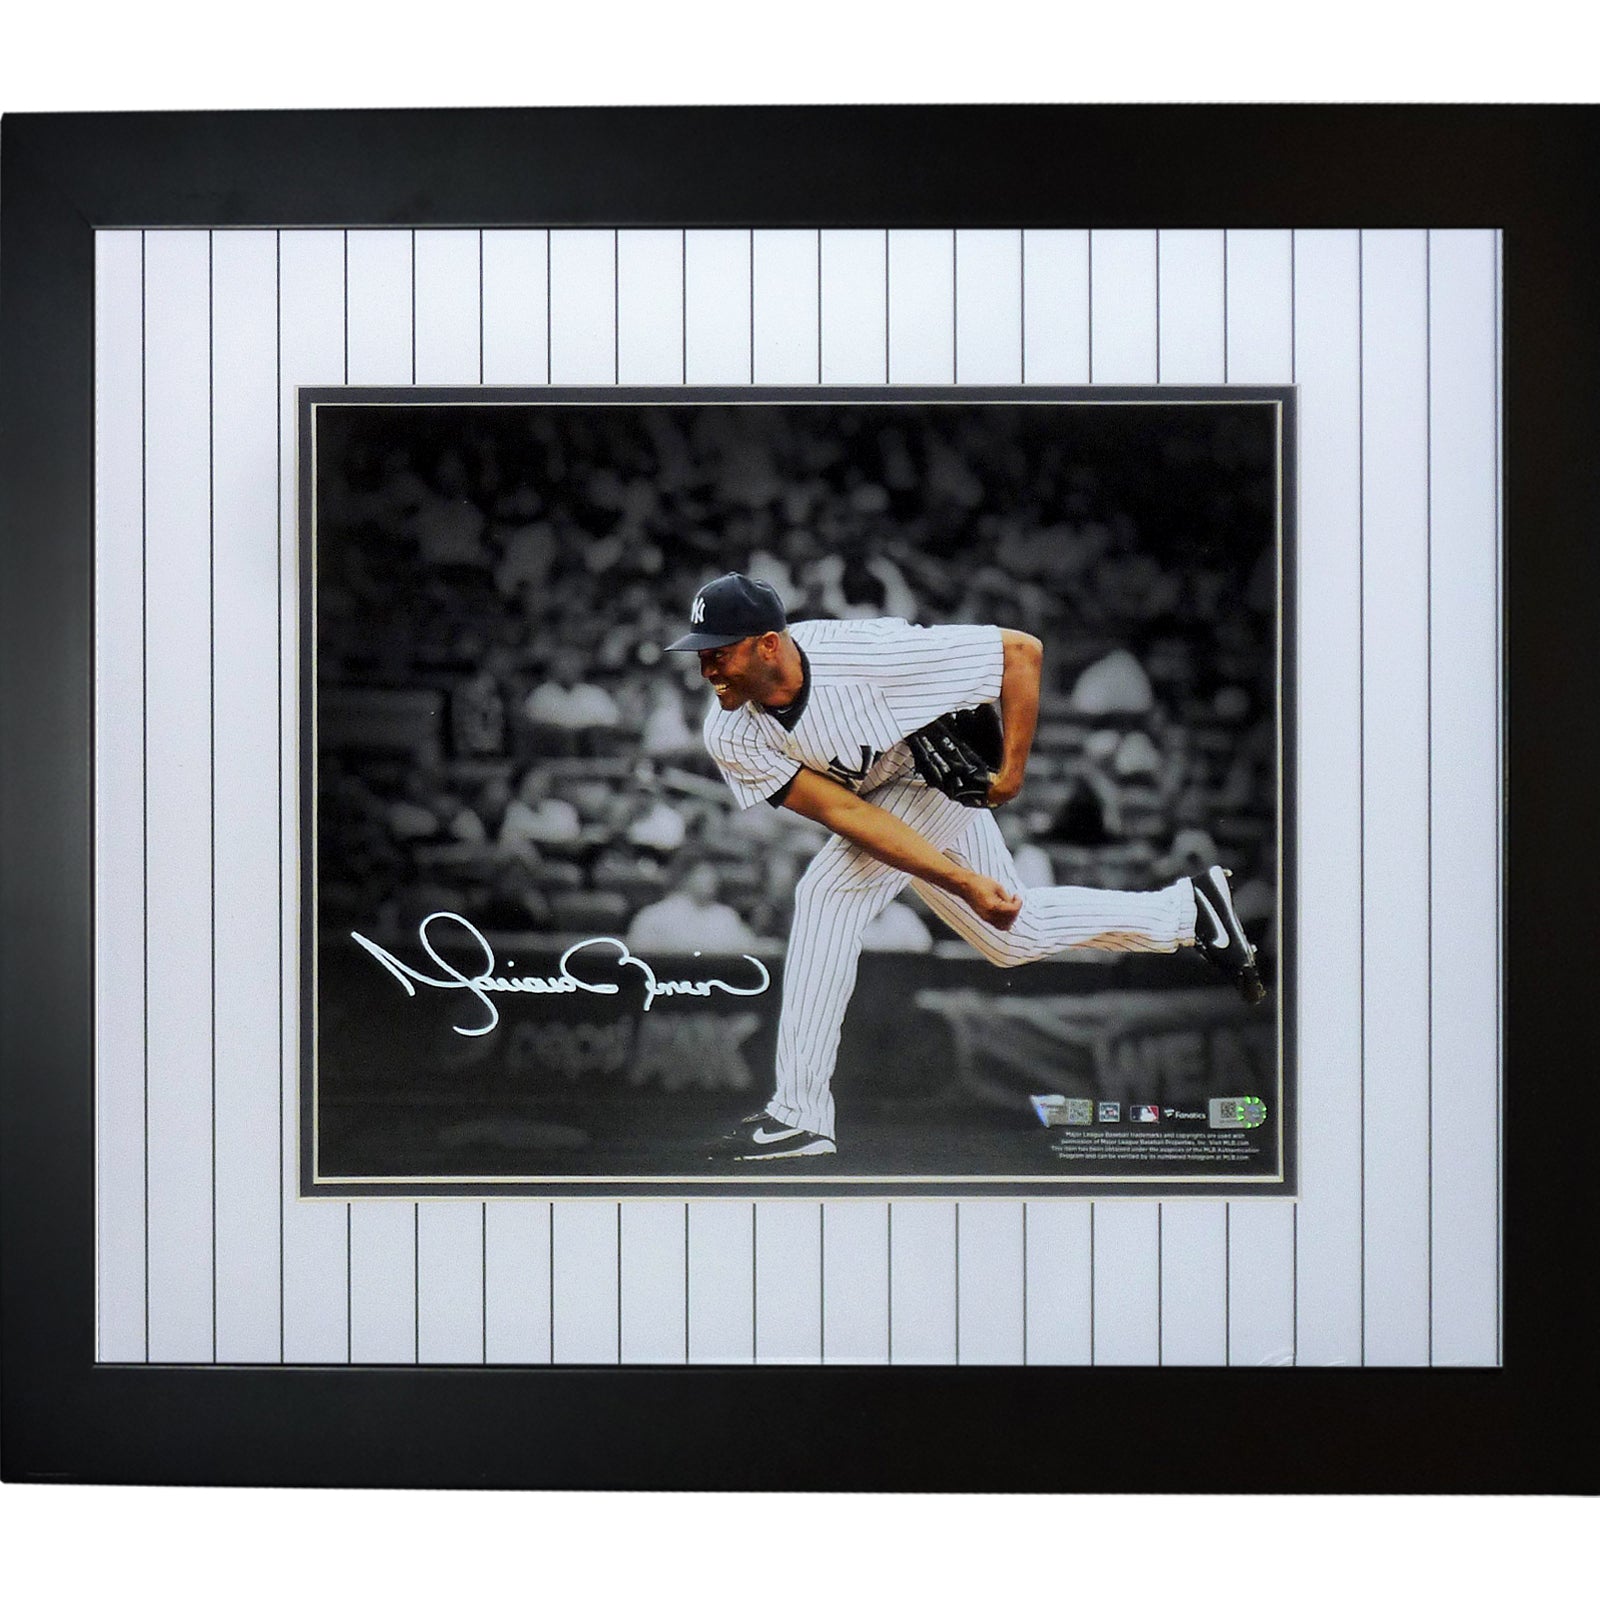 Mariano Rivera Autographed Signed Framed New York Yankees 